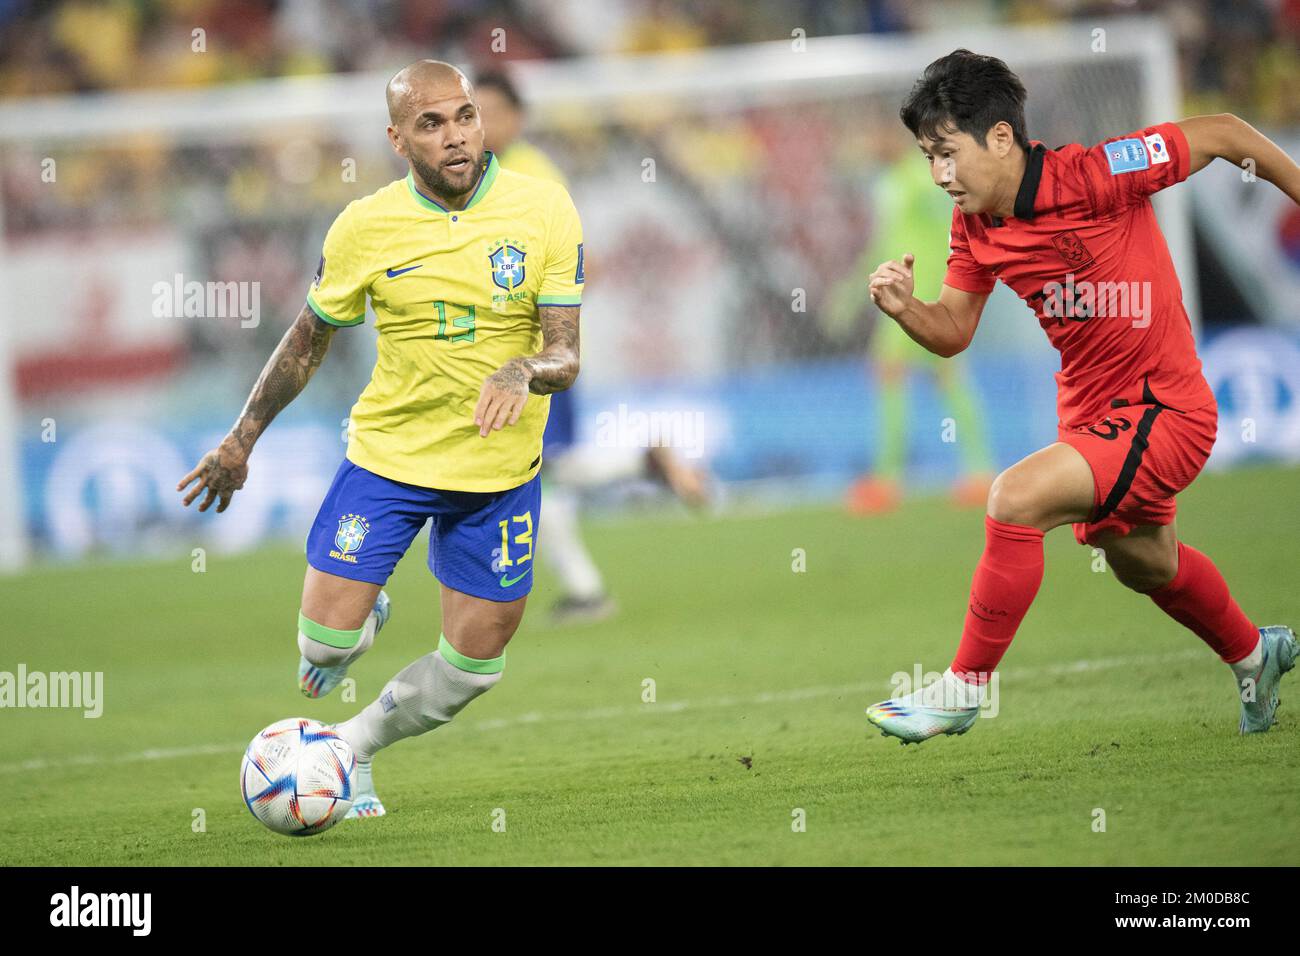 Doha, Qatar. December 05, 2022, Dani Alves of Brazil in action during the FIFA World Cup Qatar 2022 Round of 16 match between Brazil v Korea Republic at Stadium 974, on December 05, 2022 in Doha, Qatar. Photo by David Niviere/ABACAPRESS.COM Stock Photo